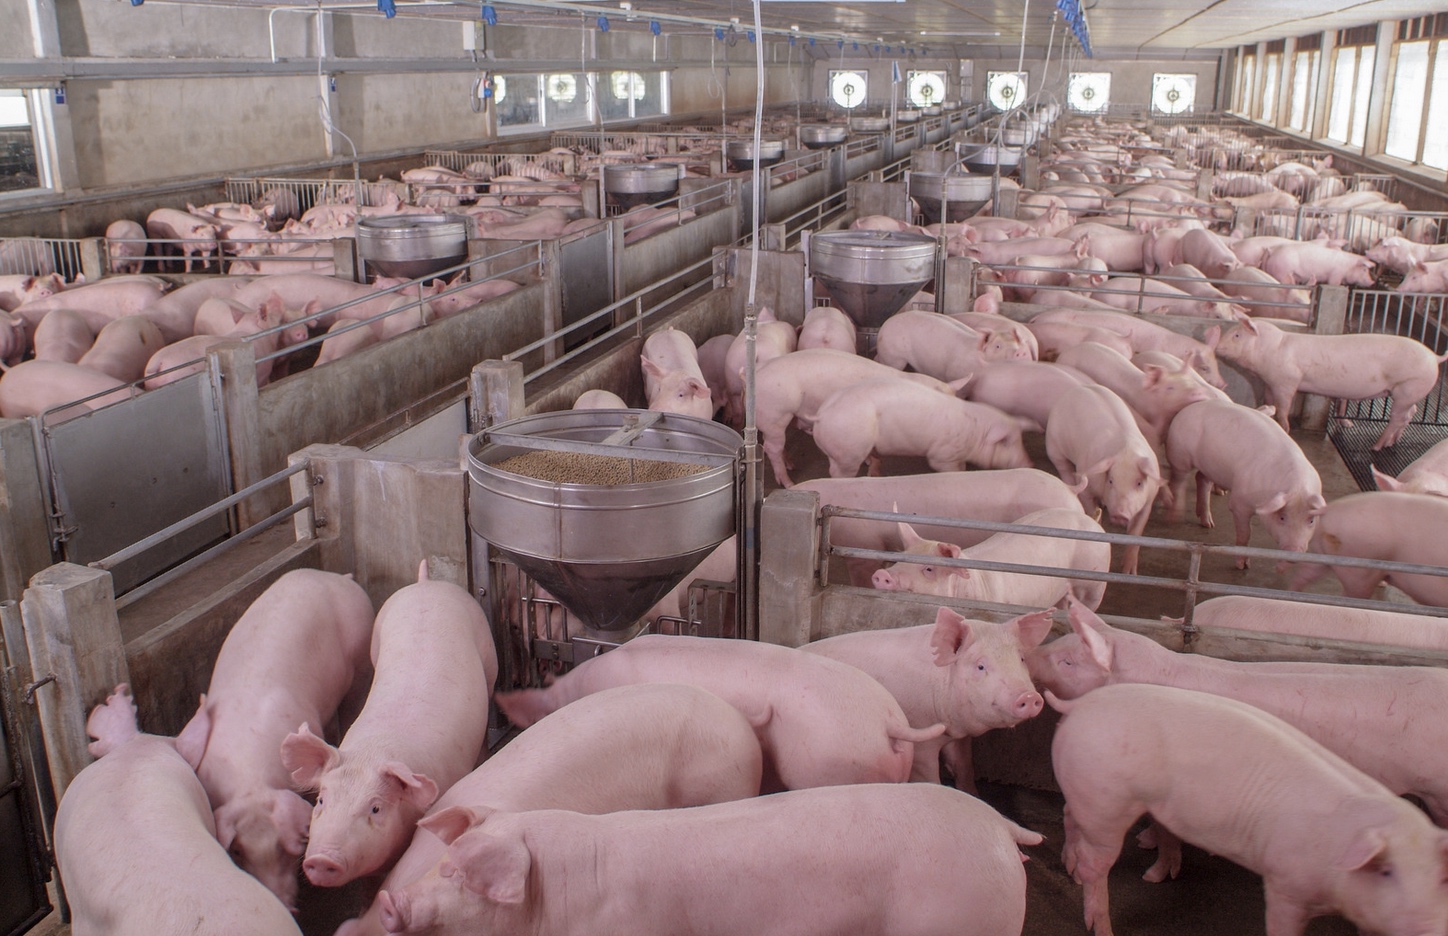 Several young swine in a feeding facility.